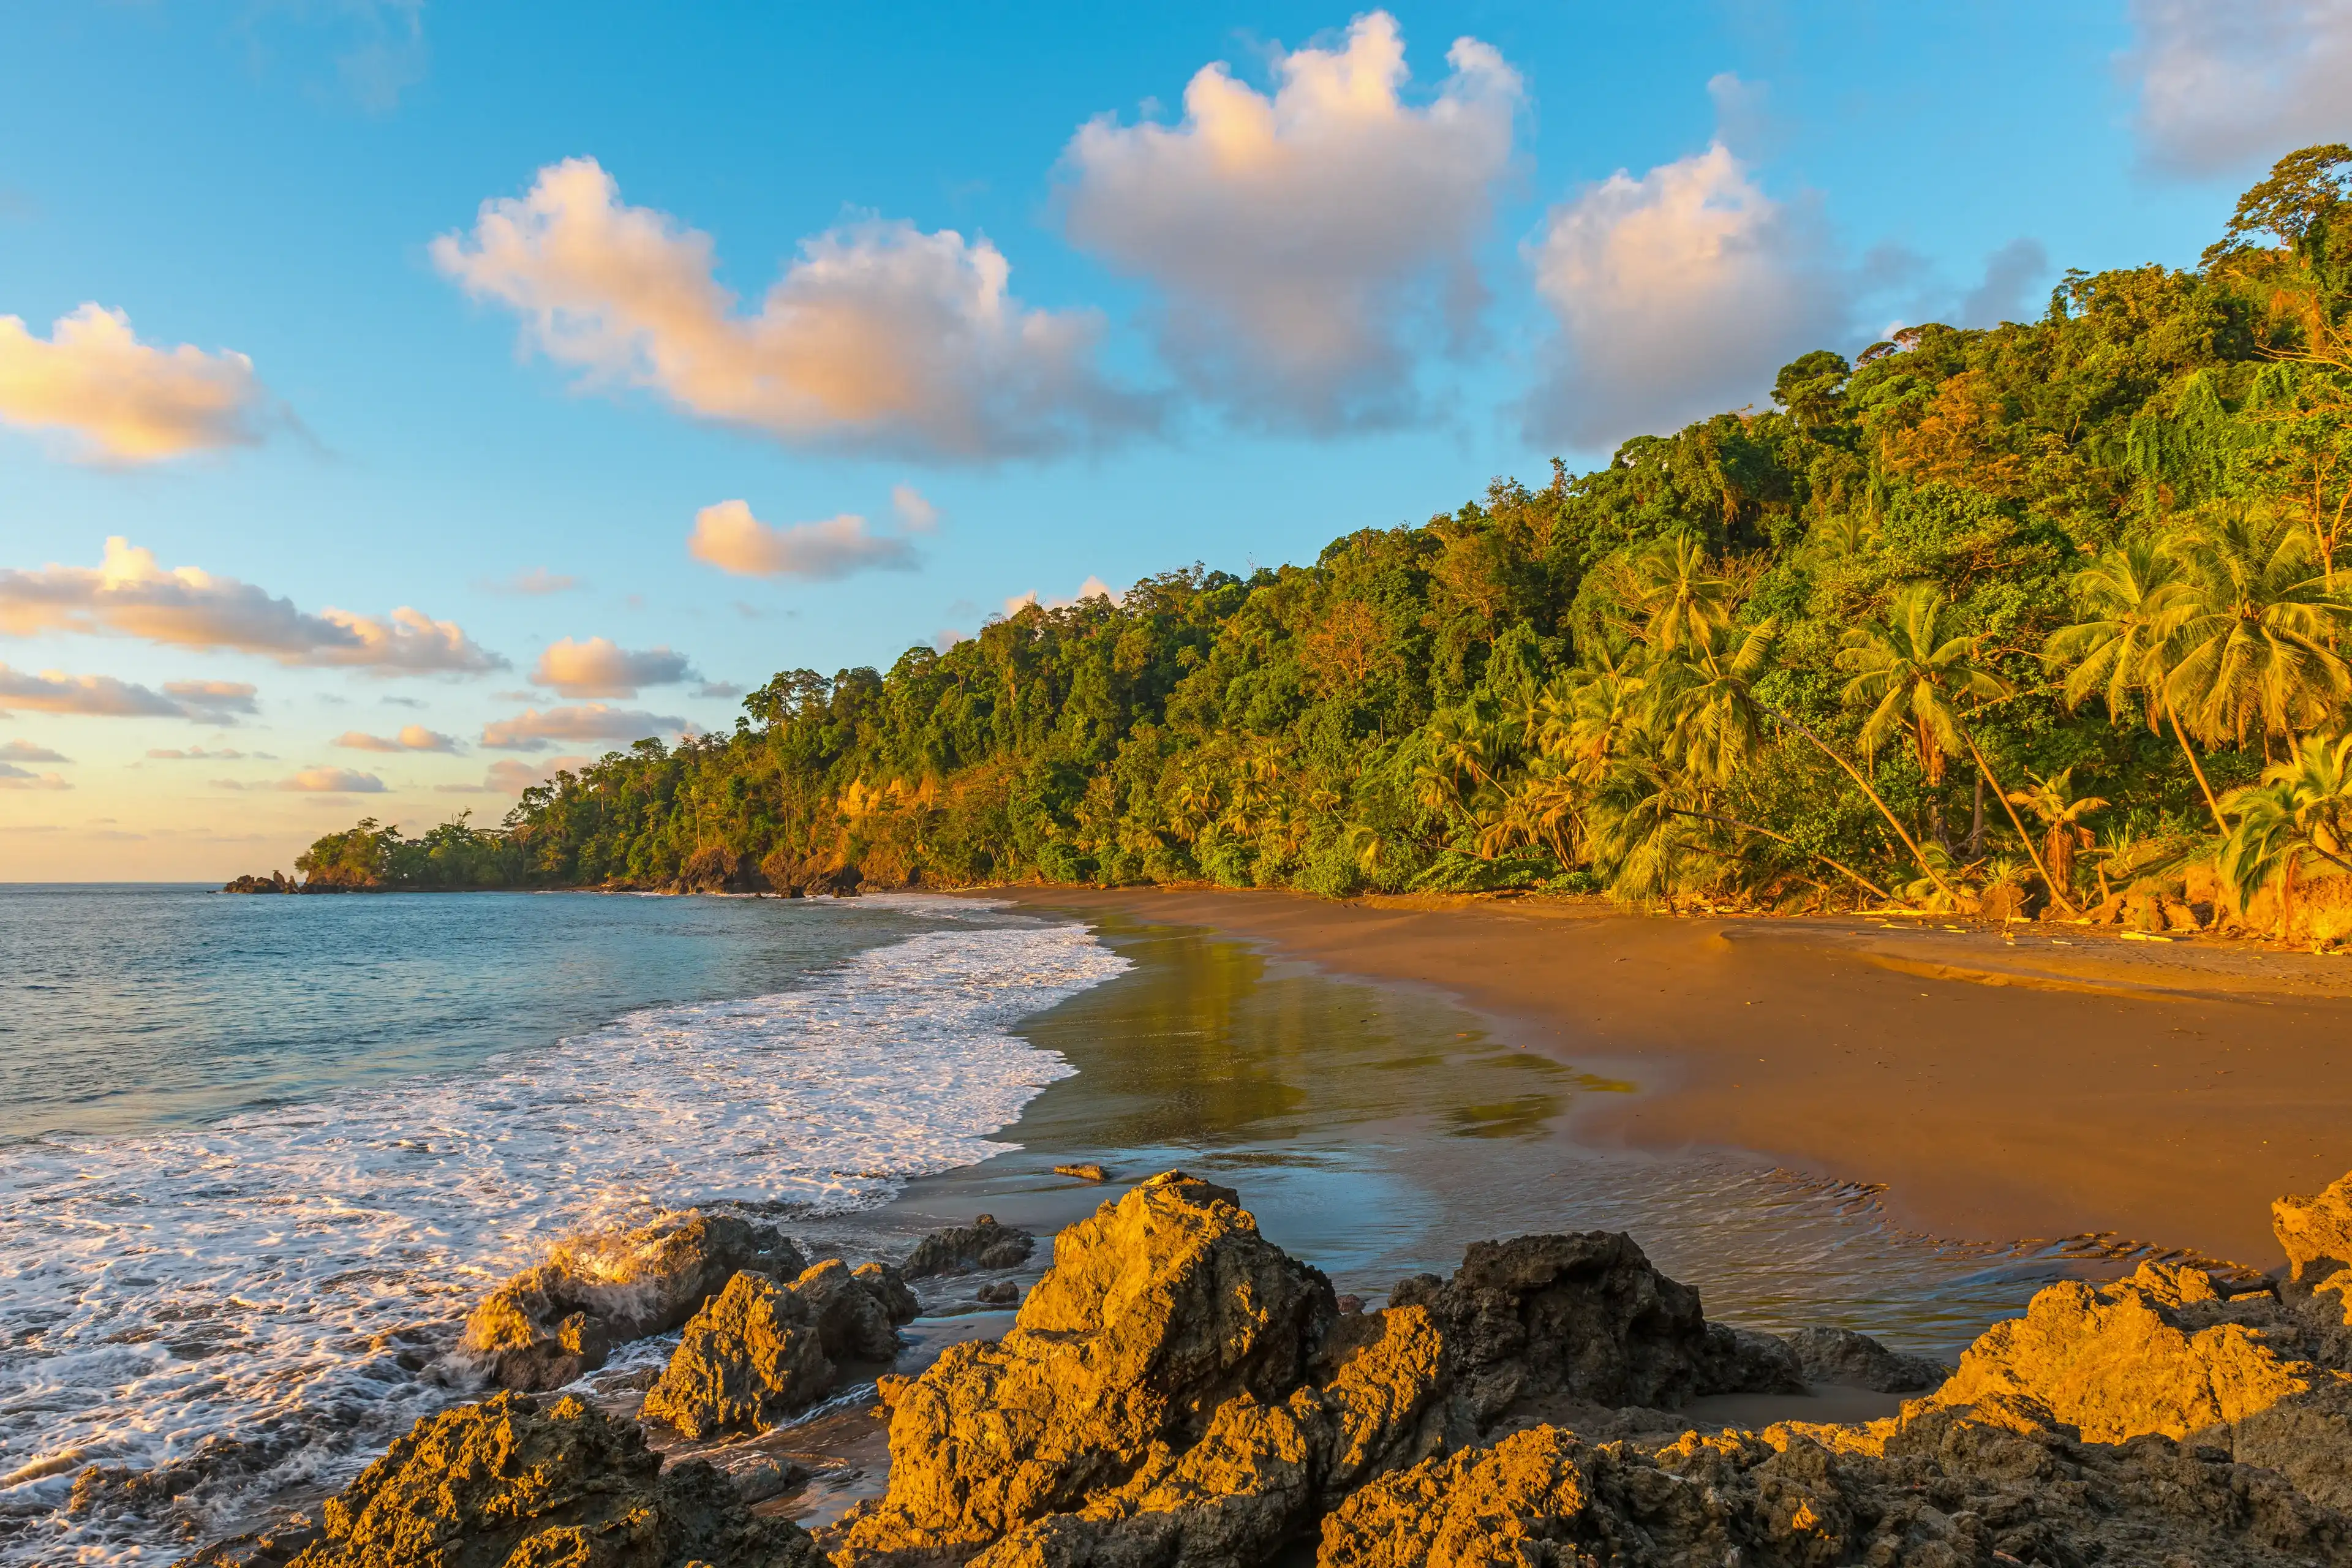 Landscape of the Pacific coastline and tropical rainforest of Costa Rica at sunset inside Corcovado national park, Osa Peninsula, Central America.